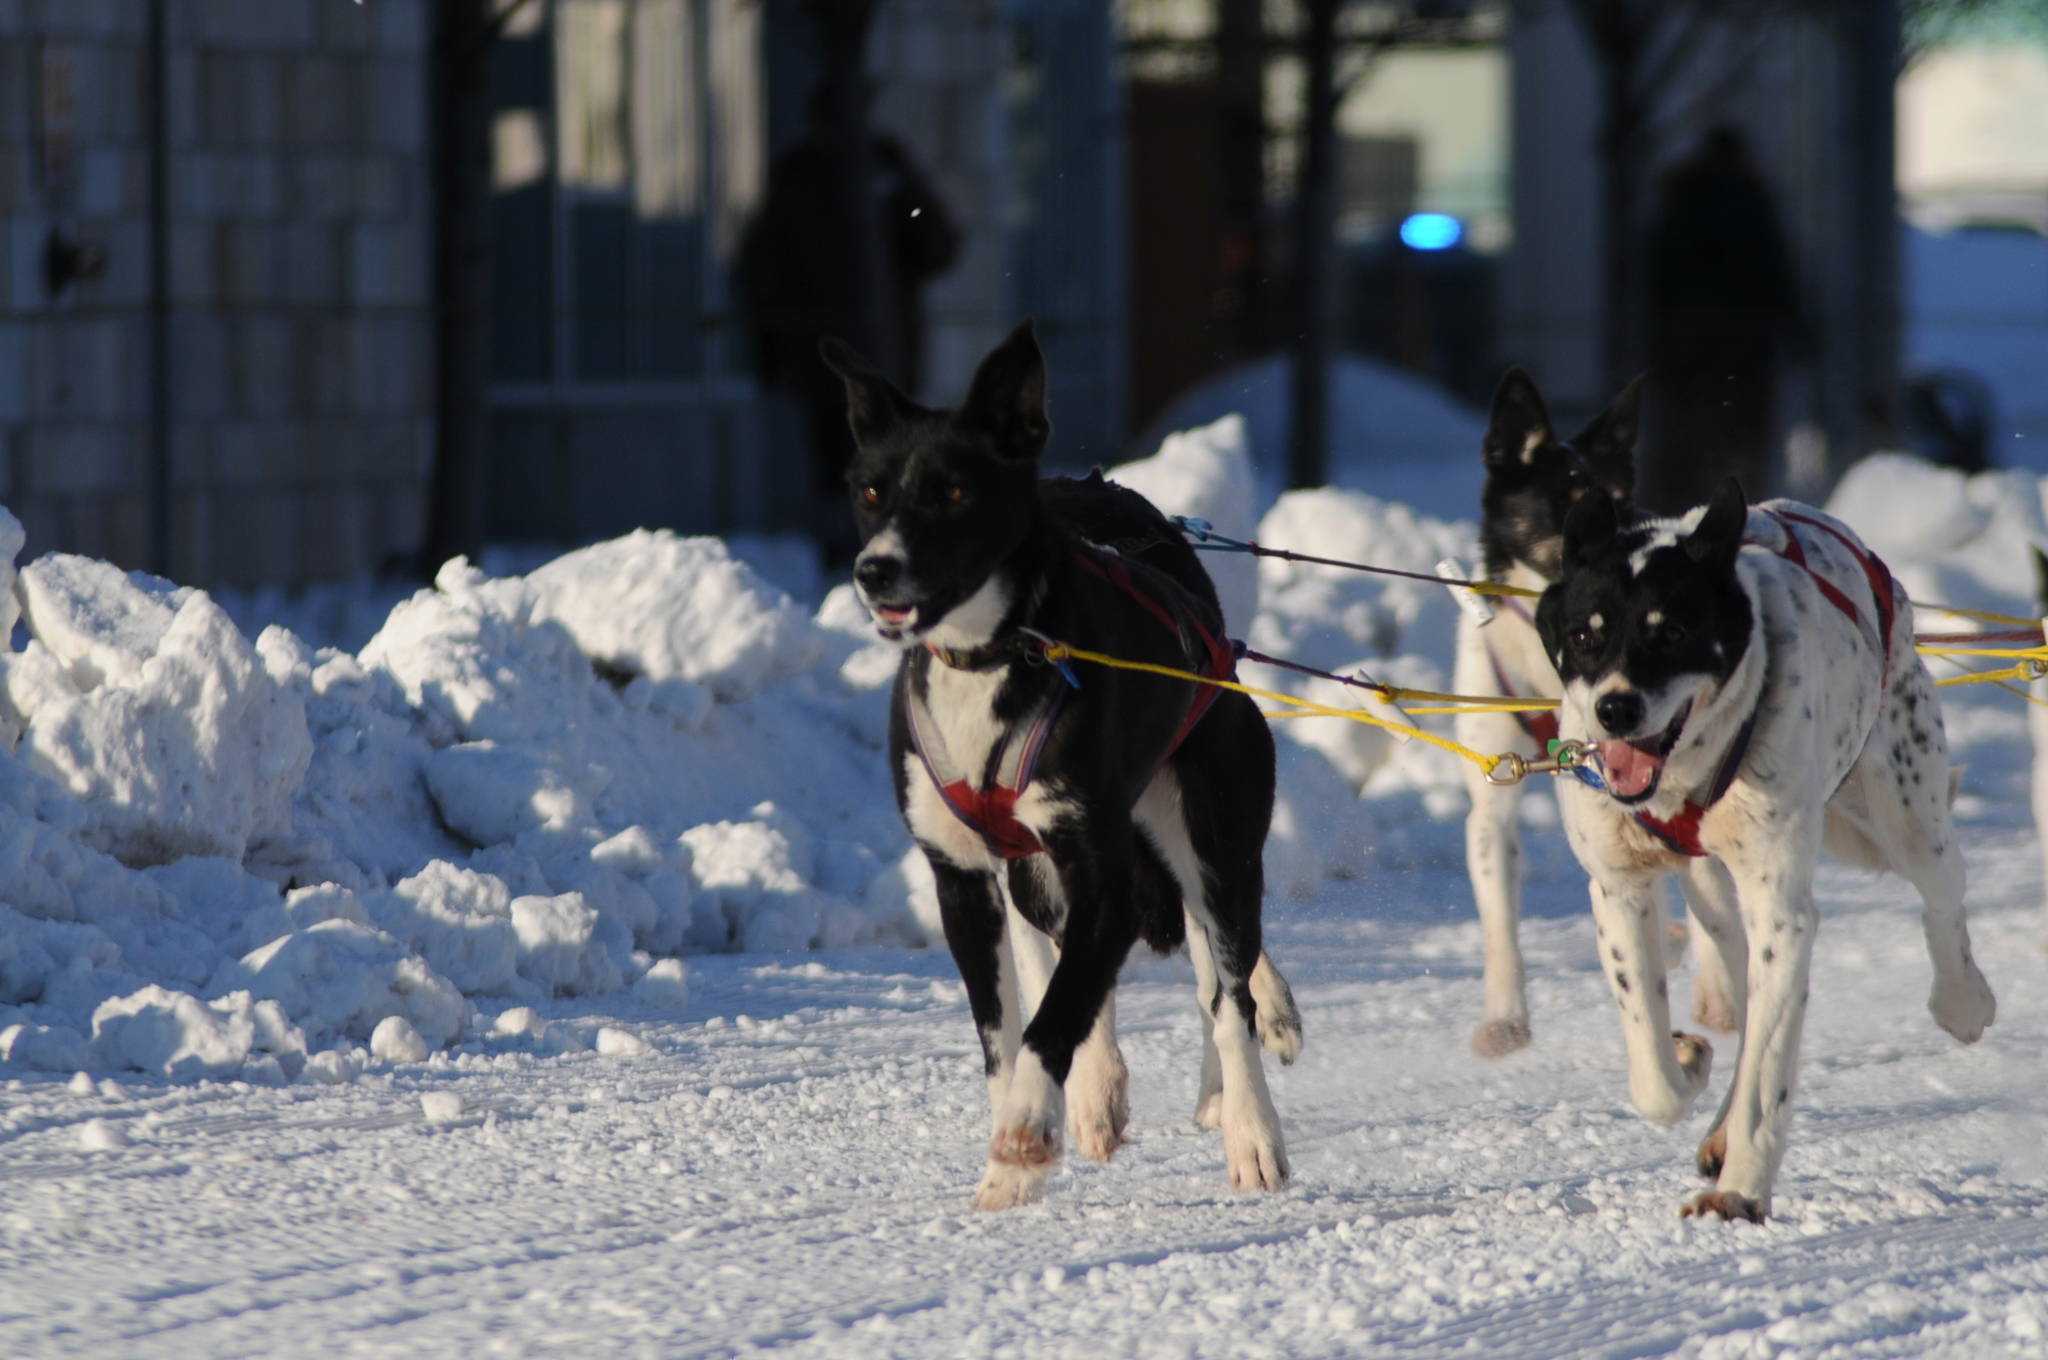 A team of sled dogs makes its way down the trail along 4th Avenue for the ceremonial start of the 45th Iditarod on Saturday, March 4, 2017 in Anchorage, Alaska. (Elizabeth Earl/Peninsula Clarion)